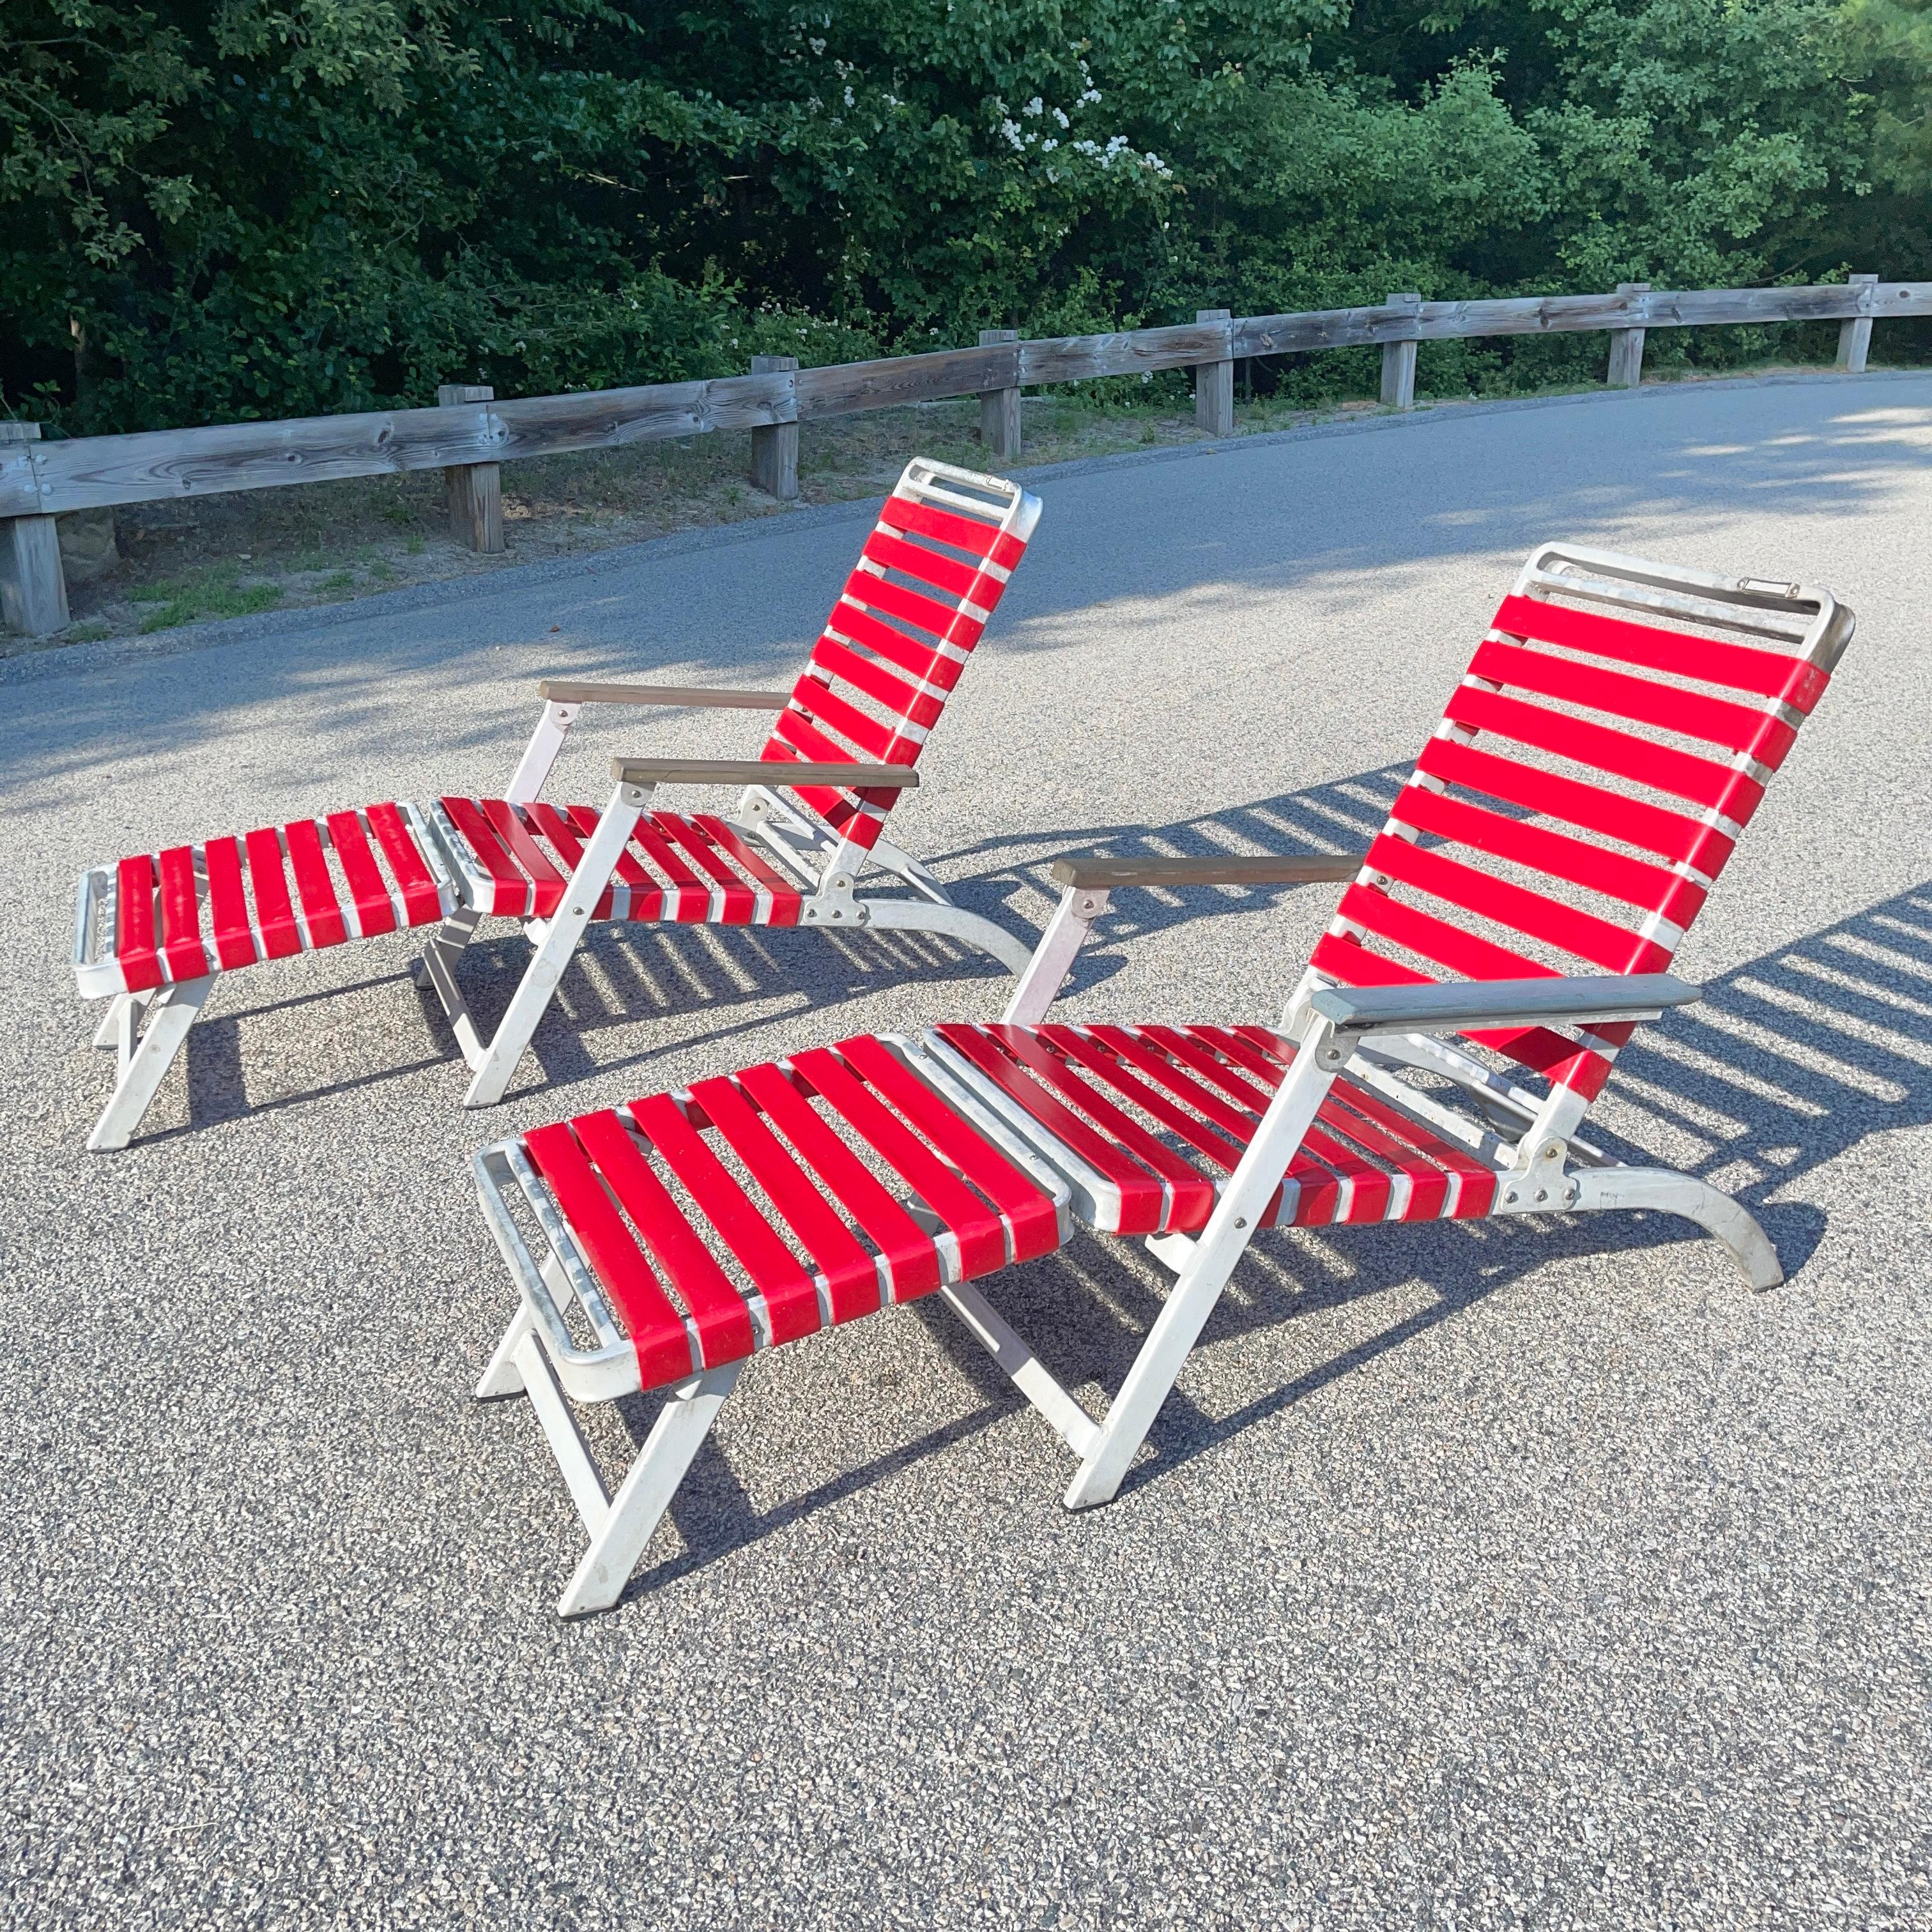 These two folding aluminum lounge chairs were made for the SS United States ocean liner and produced by the Troy Sunshade Company in 1952. 
Note the slot for name tag for passengers who would have reserved the chair aboard the ship.
Red